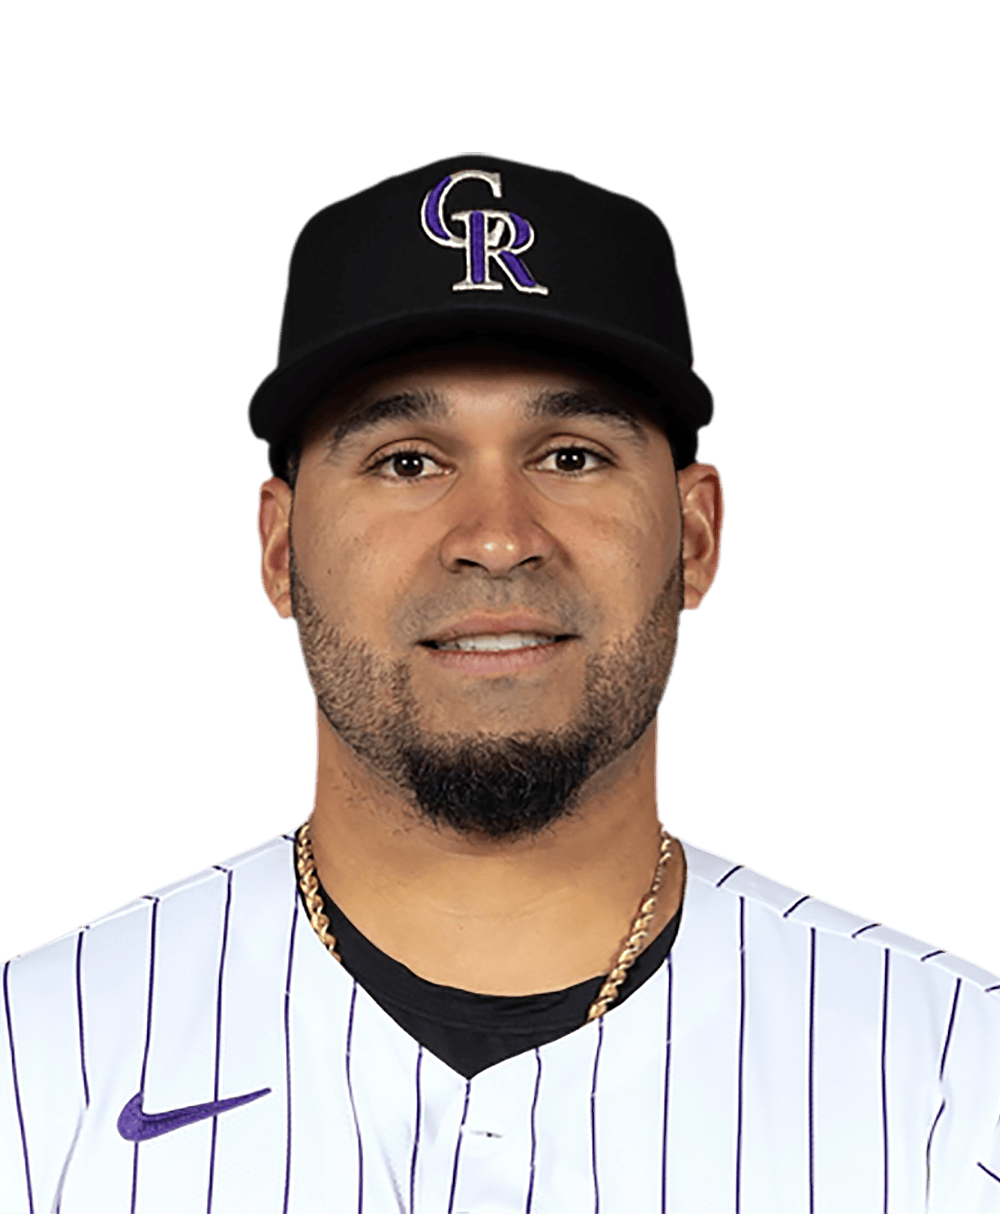 Rockies manager makes return to San Diego